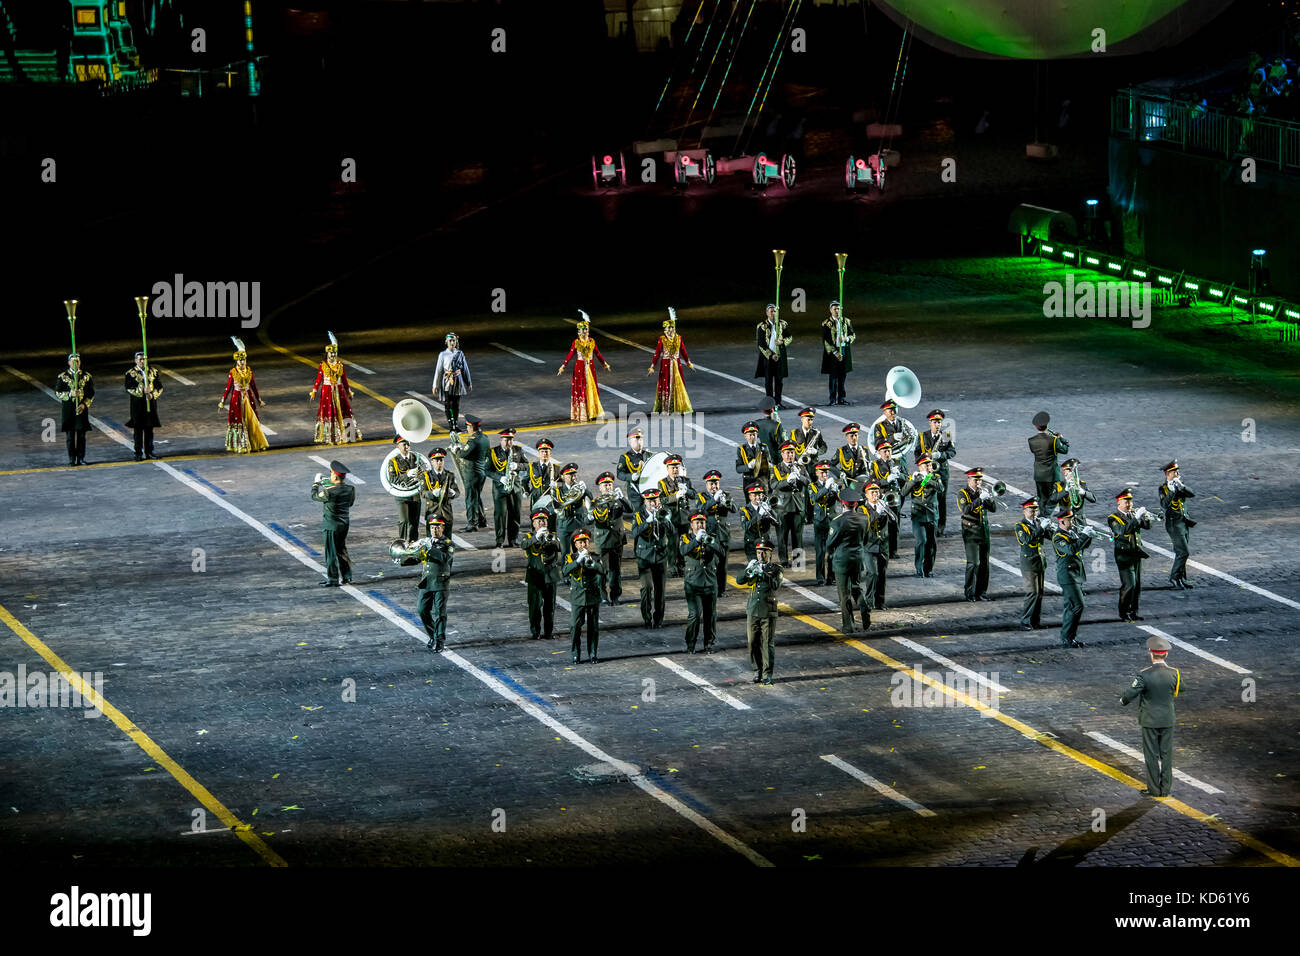 Performance of The Band of the Armed Forces of Uzbekistan on International Military Tattoo Music Festival “Spasskaya Tower” in Moscow, Russia Stock Photo